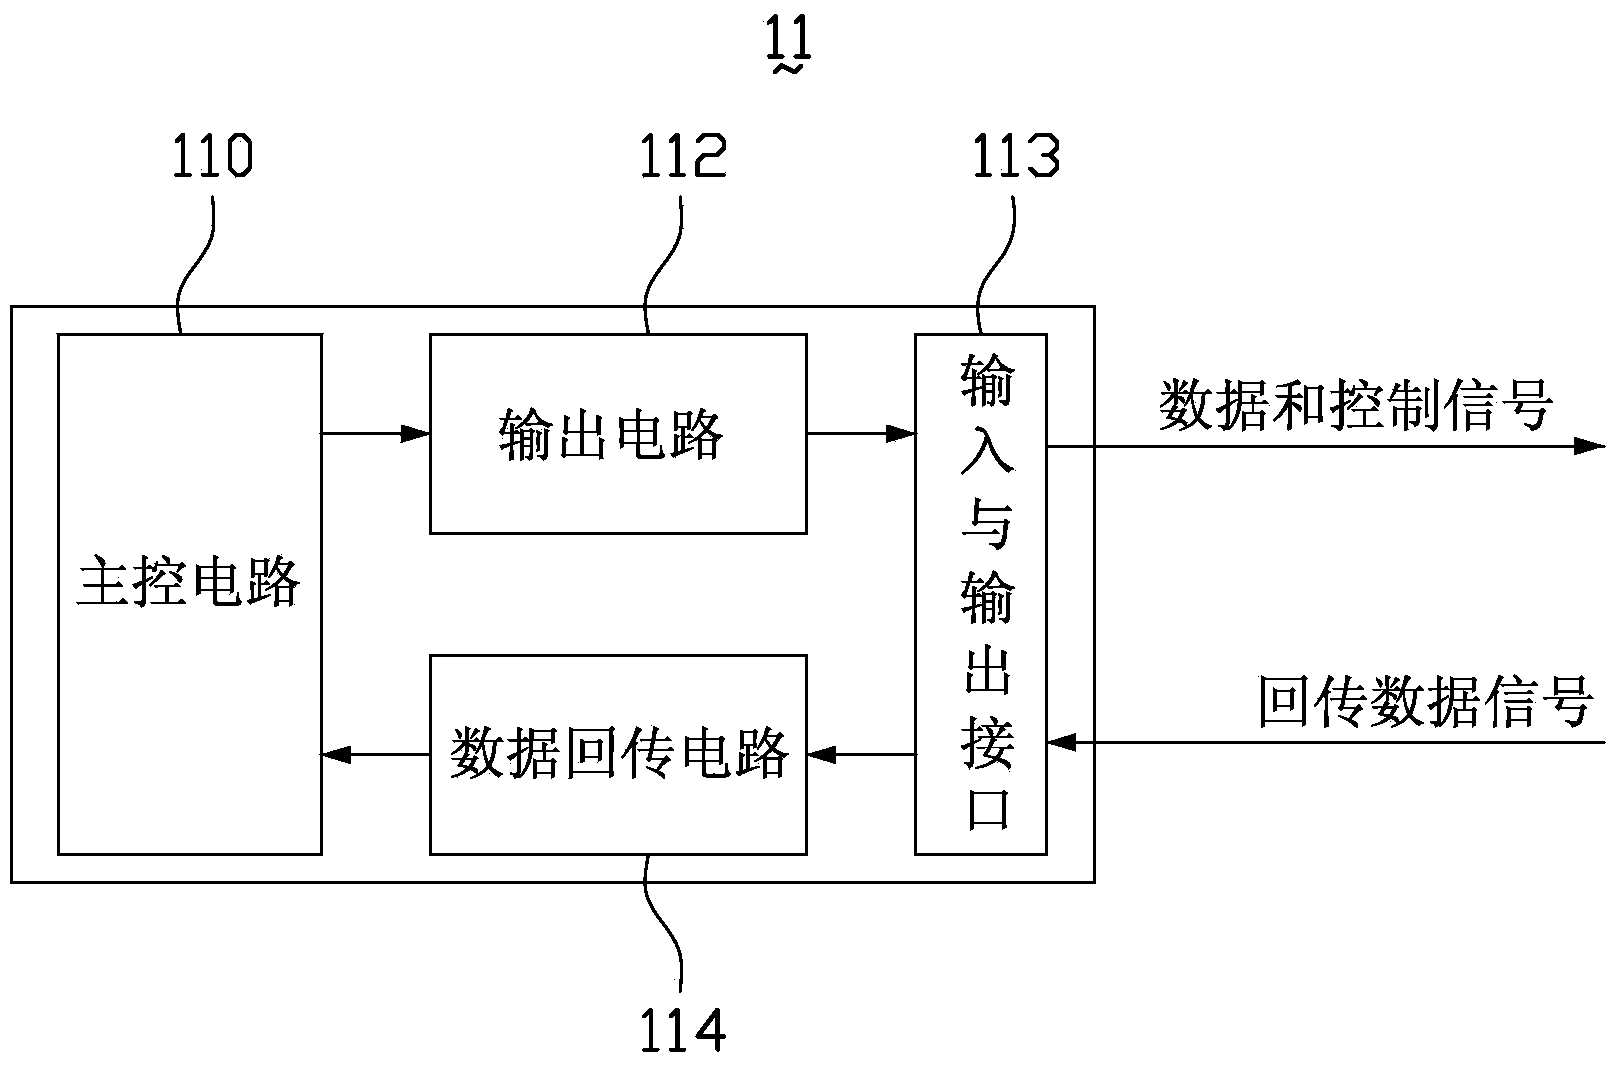 LED (light-emitting diode) light panel and LED display screen system